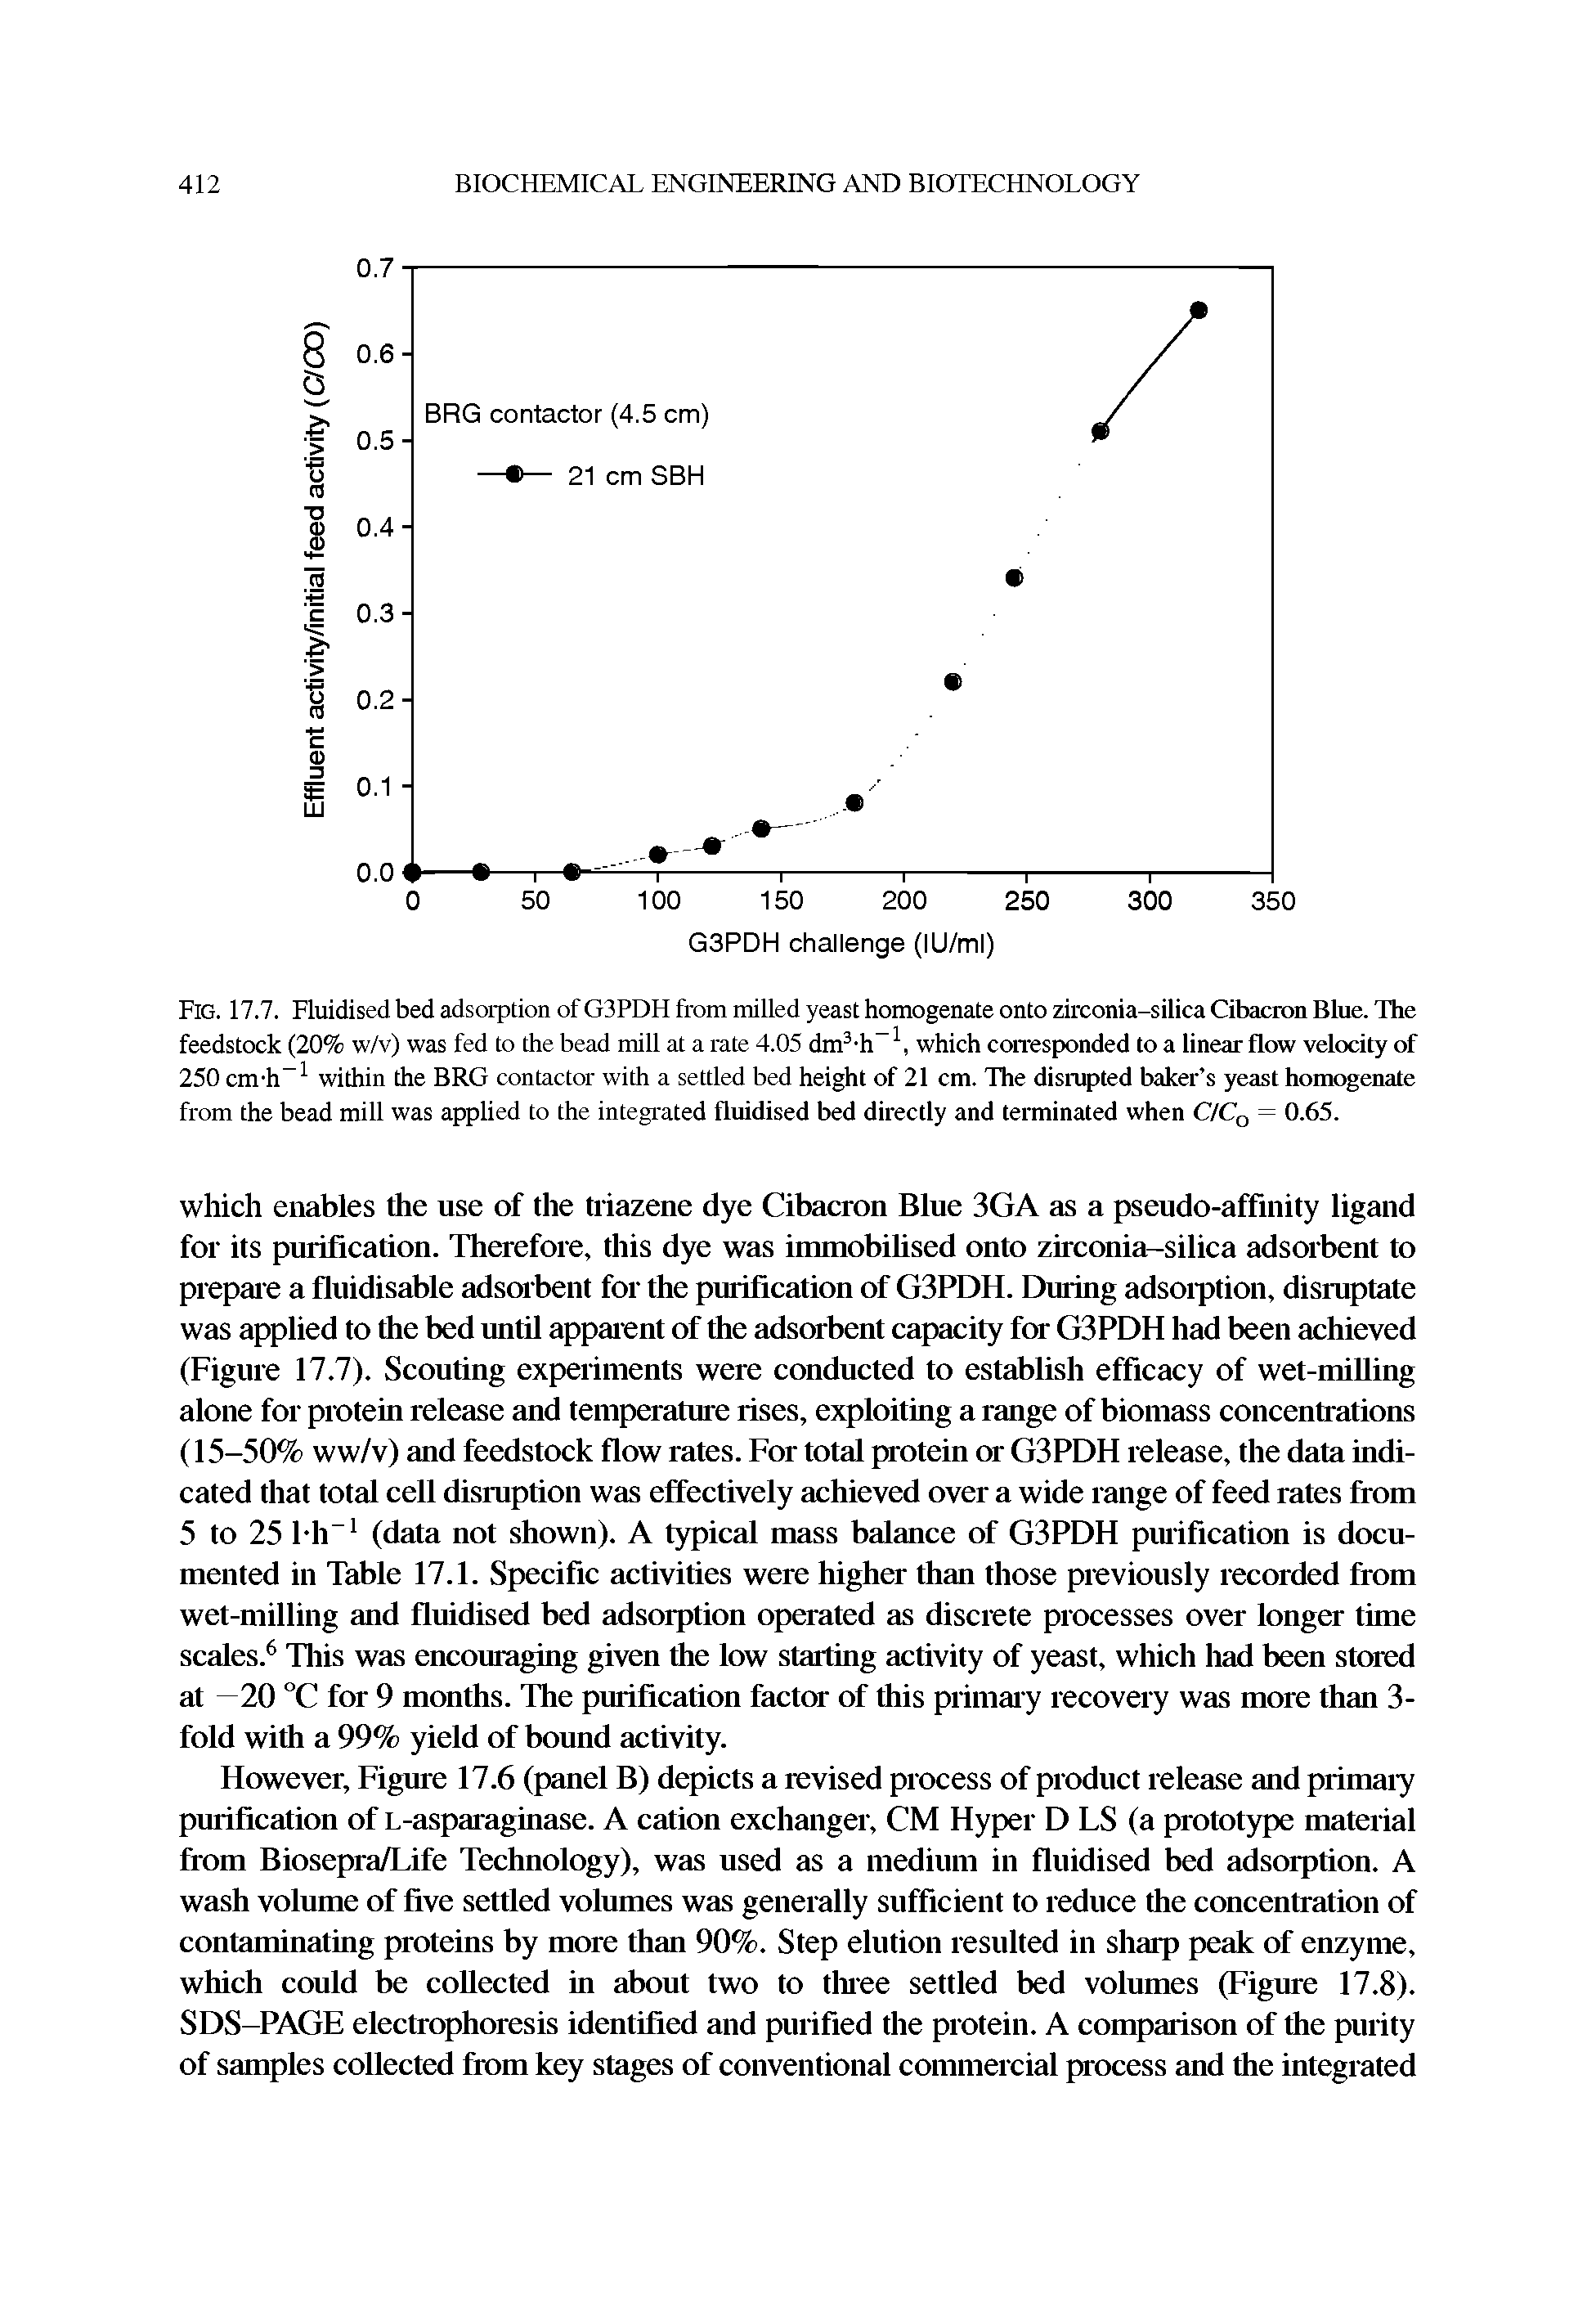 Fig. 17.7. Fluidised bed adsorption of G3PDH from milled yeast homogenate onto zirconia-silica Cibacron Blue. The feedstock (20% w/v) was fed to the bead mill at a rate 4.05 dm3-h 1, which corresponded to a linear flow velocity of 250 cm-h 1 within the BRG contactor with a settled bed height of 21 cm. The disrupted baker s yeast homogenate from the bead mill was applied to the integrated fluidised bed directly and terminated when C/Ca = 0.65.